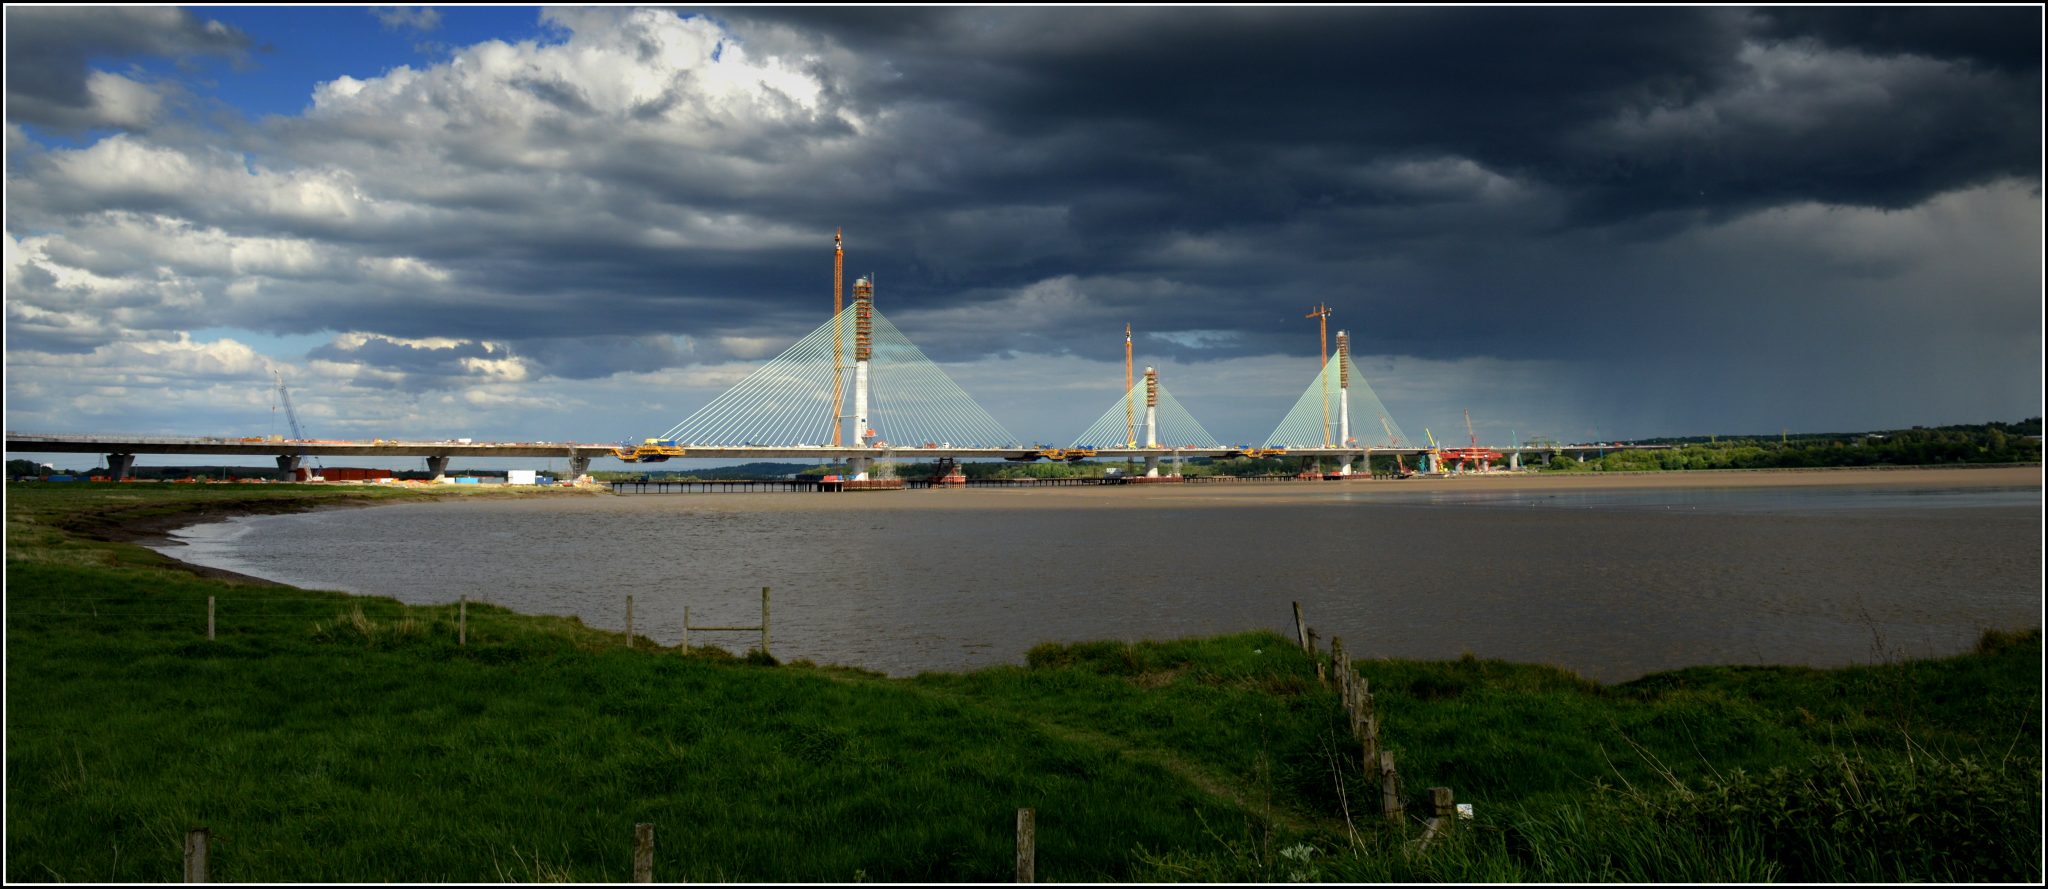 Special Form travellers for Mersey Gateway Bridge